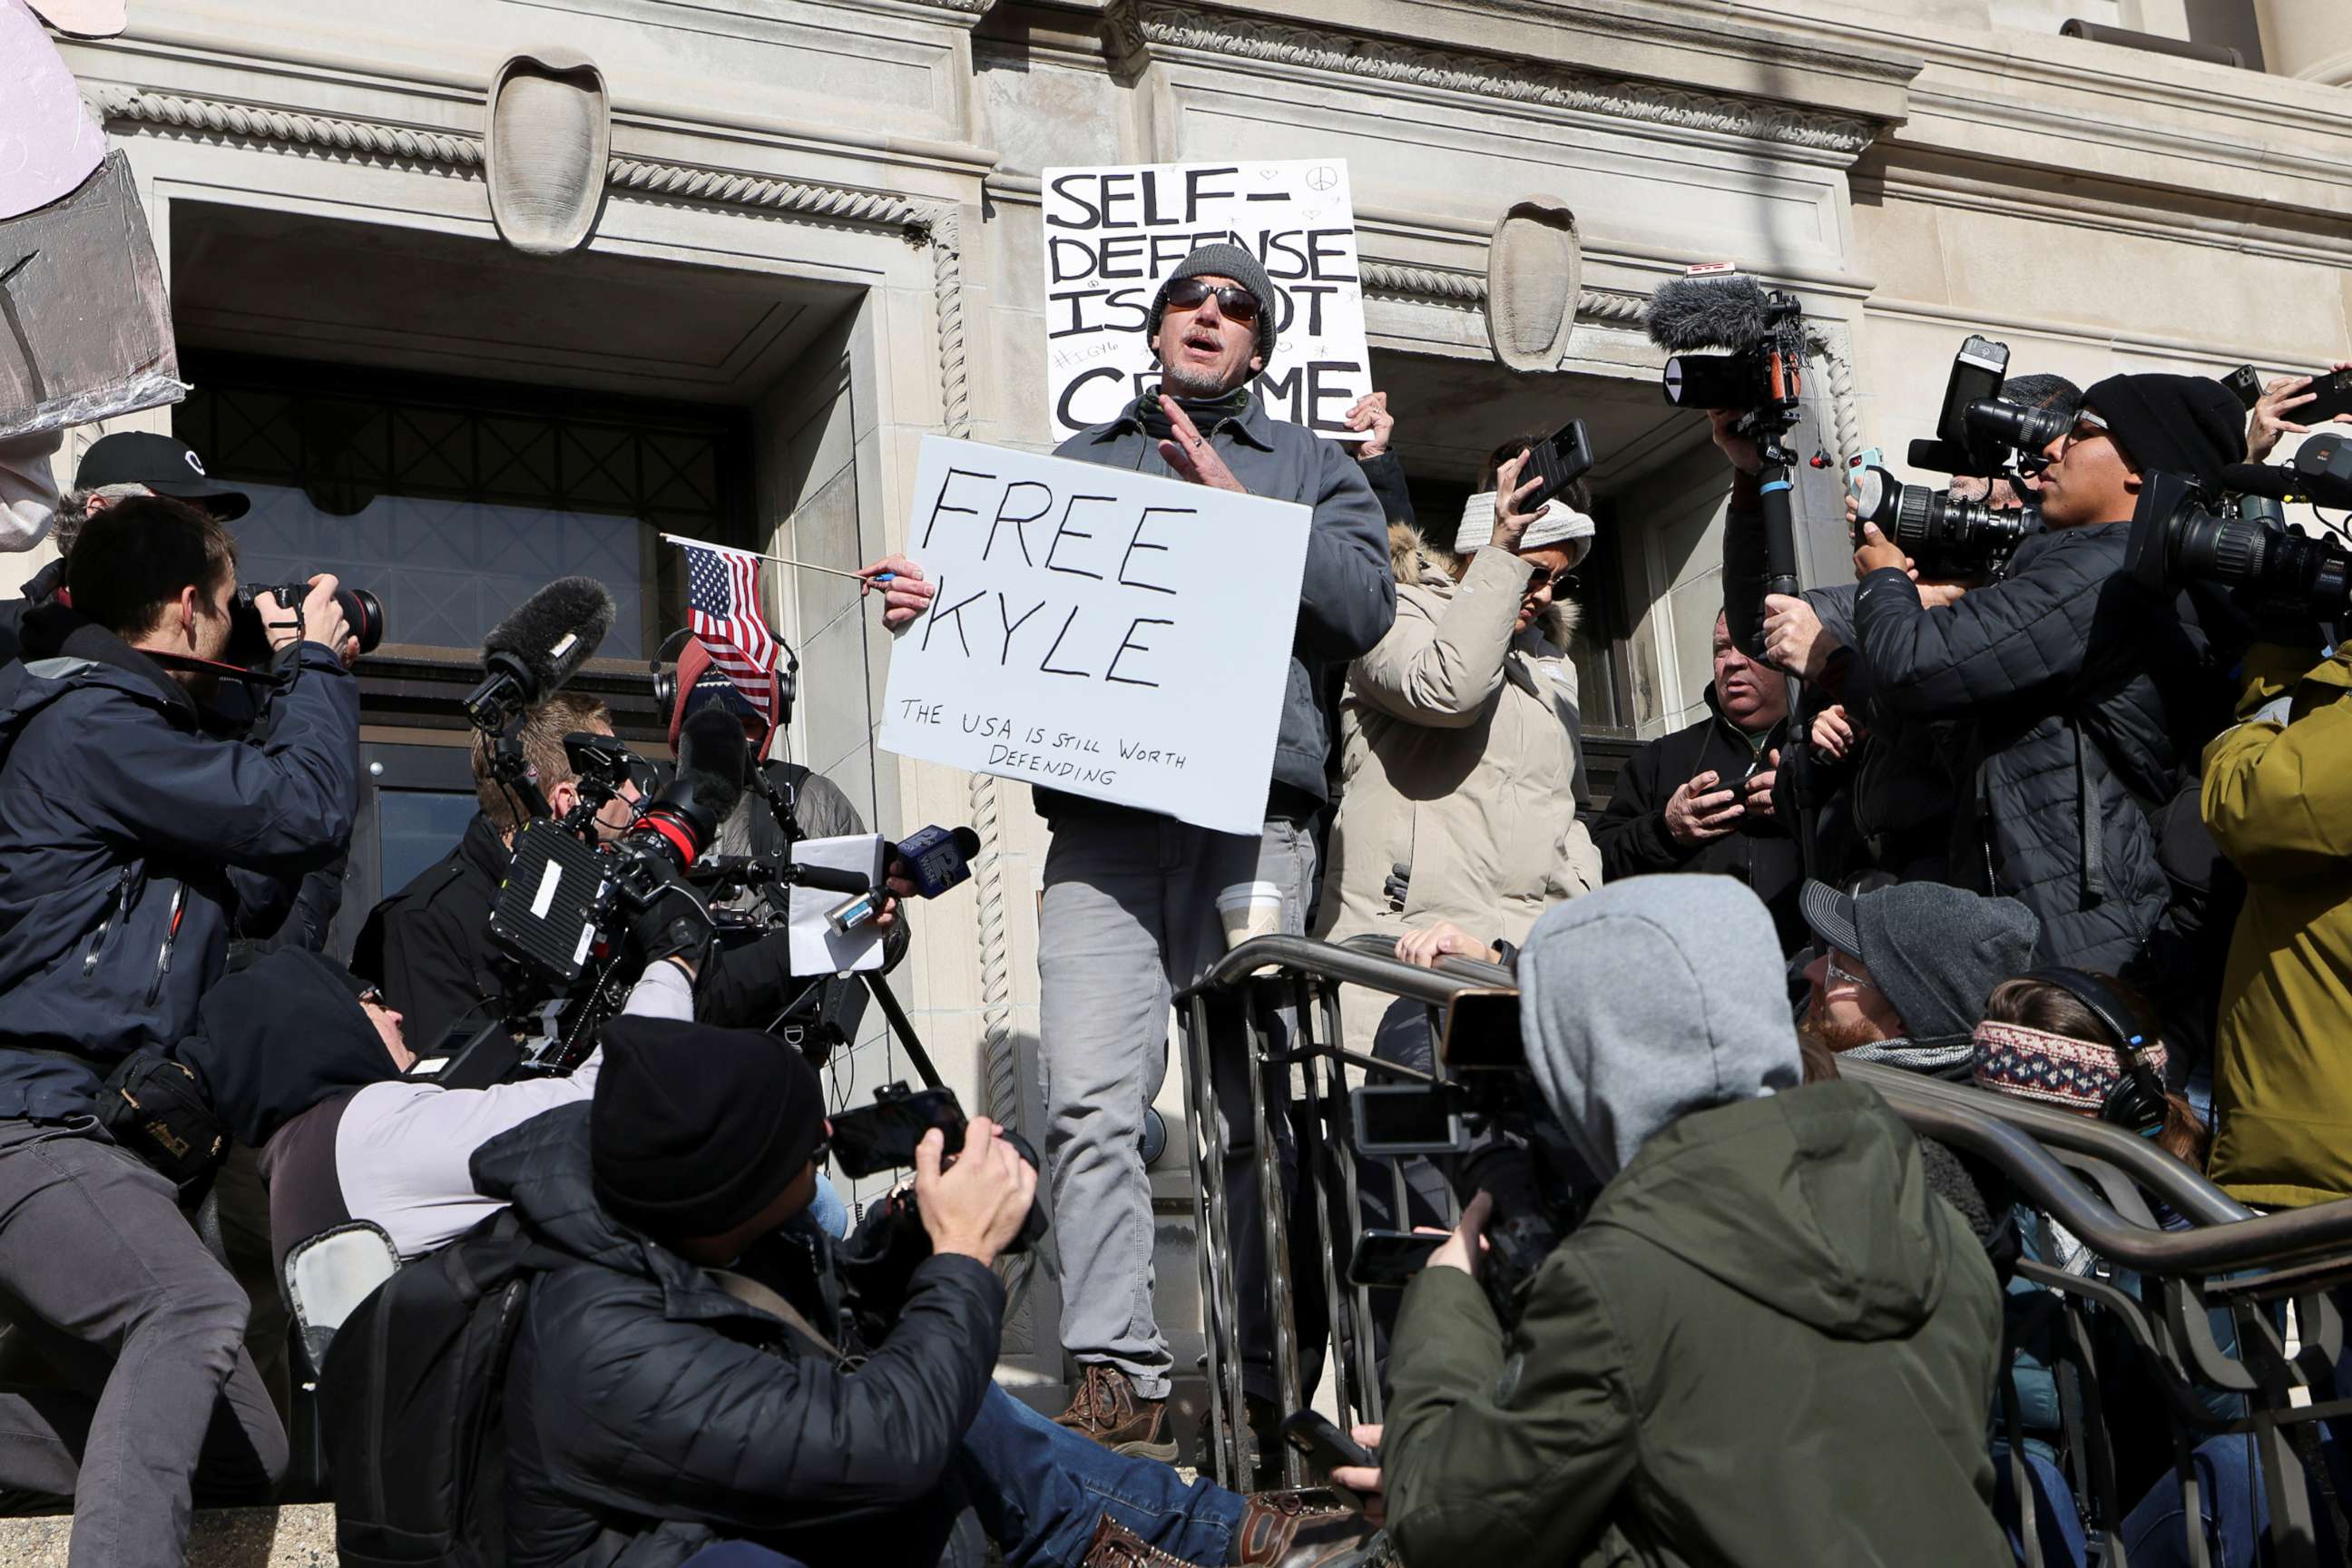 PHOTO: People react to the verdict in the trial of Kyle Rittenhouse, outside the Kenosha County Courthouse in Kenosha, Wisconsin, Nov. 19, 2021.